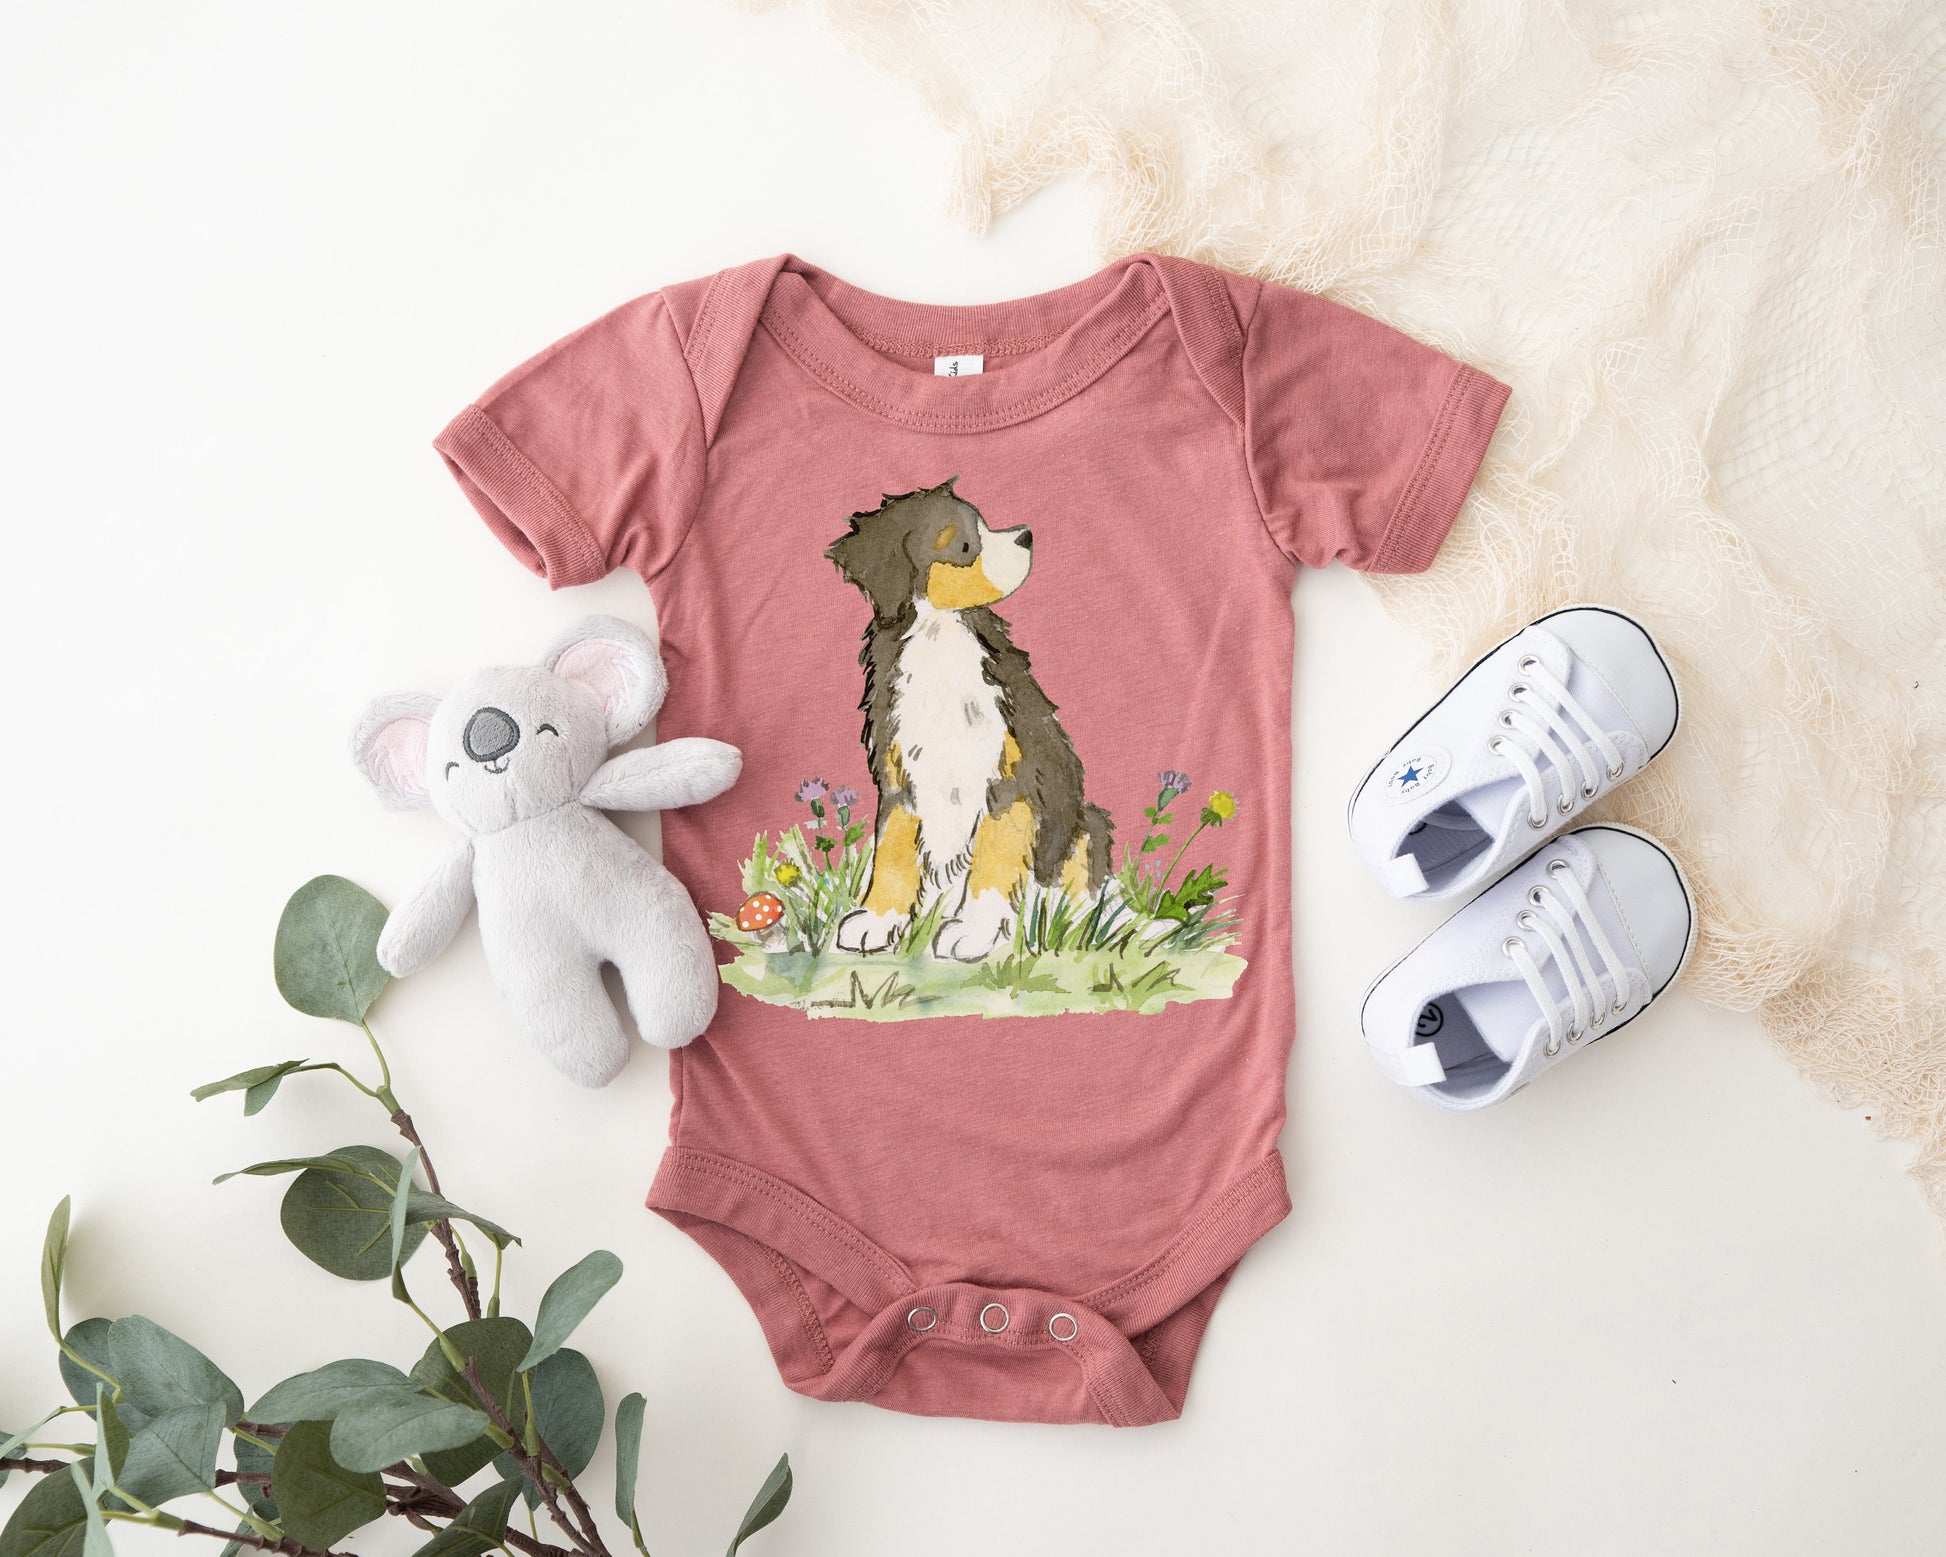 Peach colored infant bodysuit with artwork of a cute Bernese Mountain Dog on it.